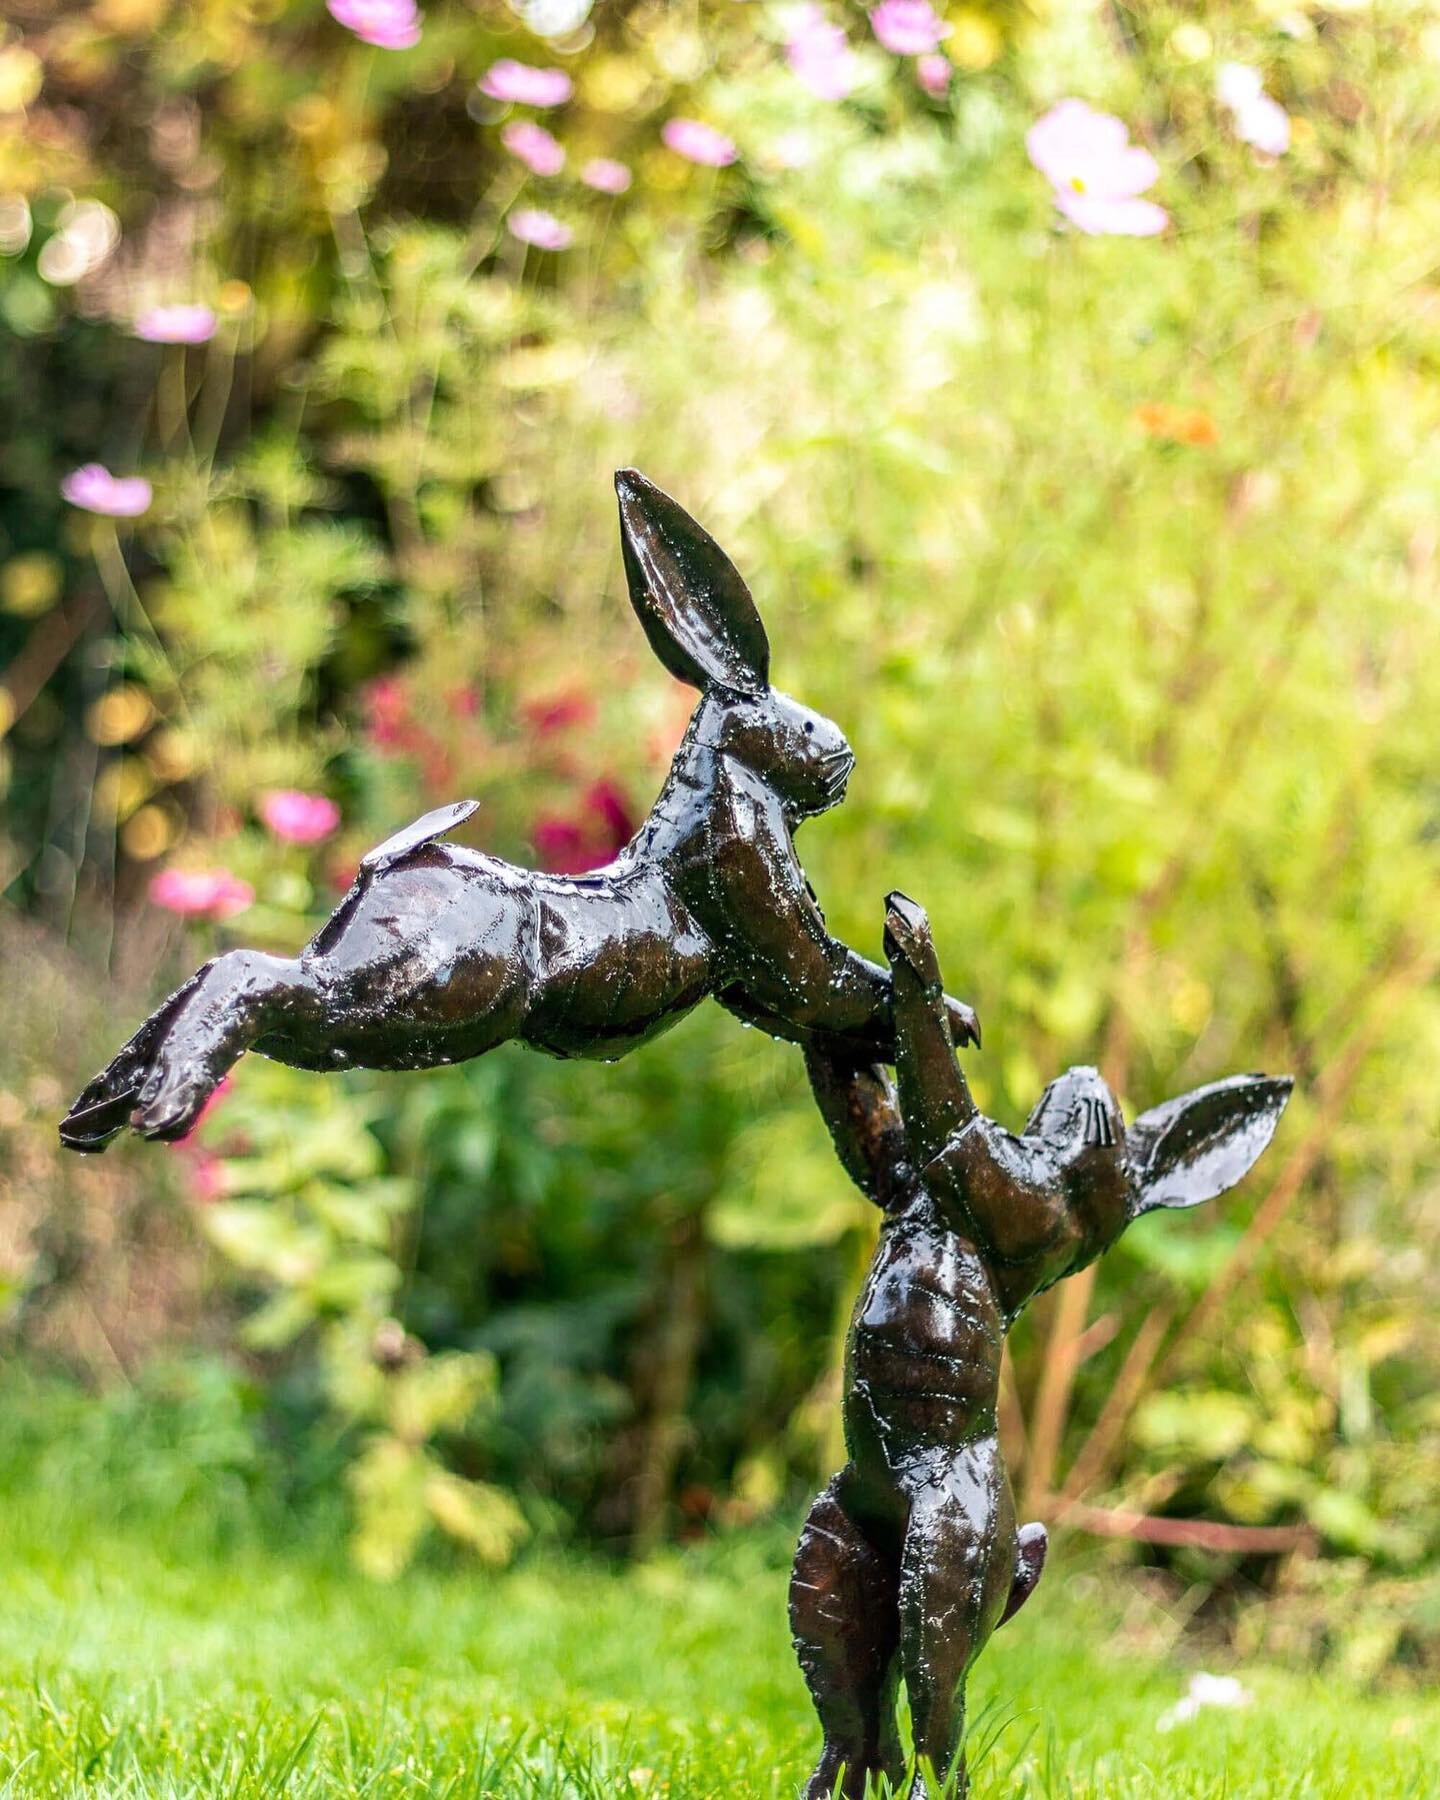 BLACK FRIDAY IS LIVE!
Visit the website to shop up to 50% off selected products. Be quick! Black Friday ends on Monday 27th Nov. 
#blackfriday #sale #hares #seagulls #bluetit #gardensculpture #ecofriendlyliving #sustainabledesign #christmasgifting